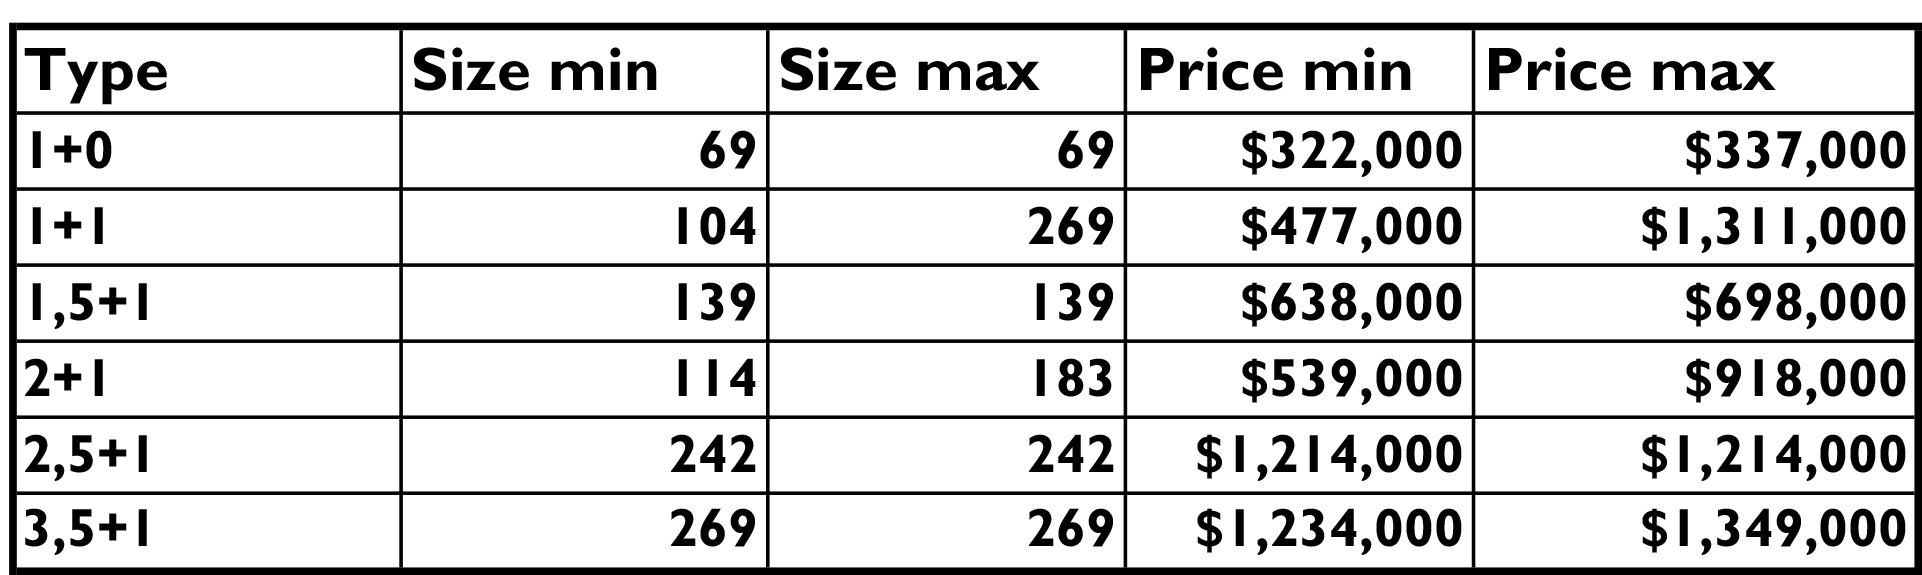 42 Maslak Price and Size List